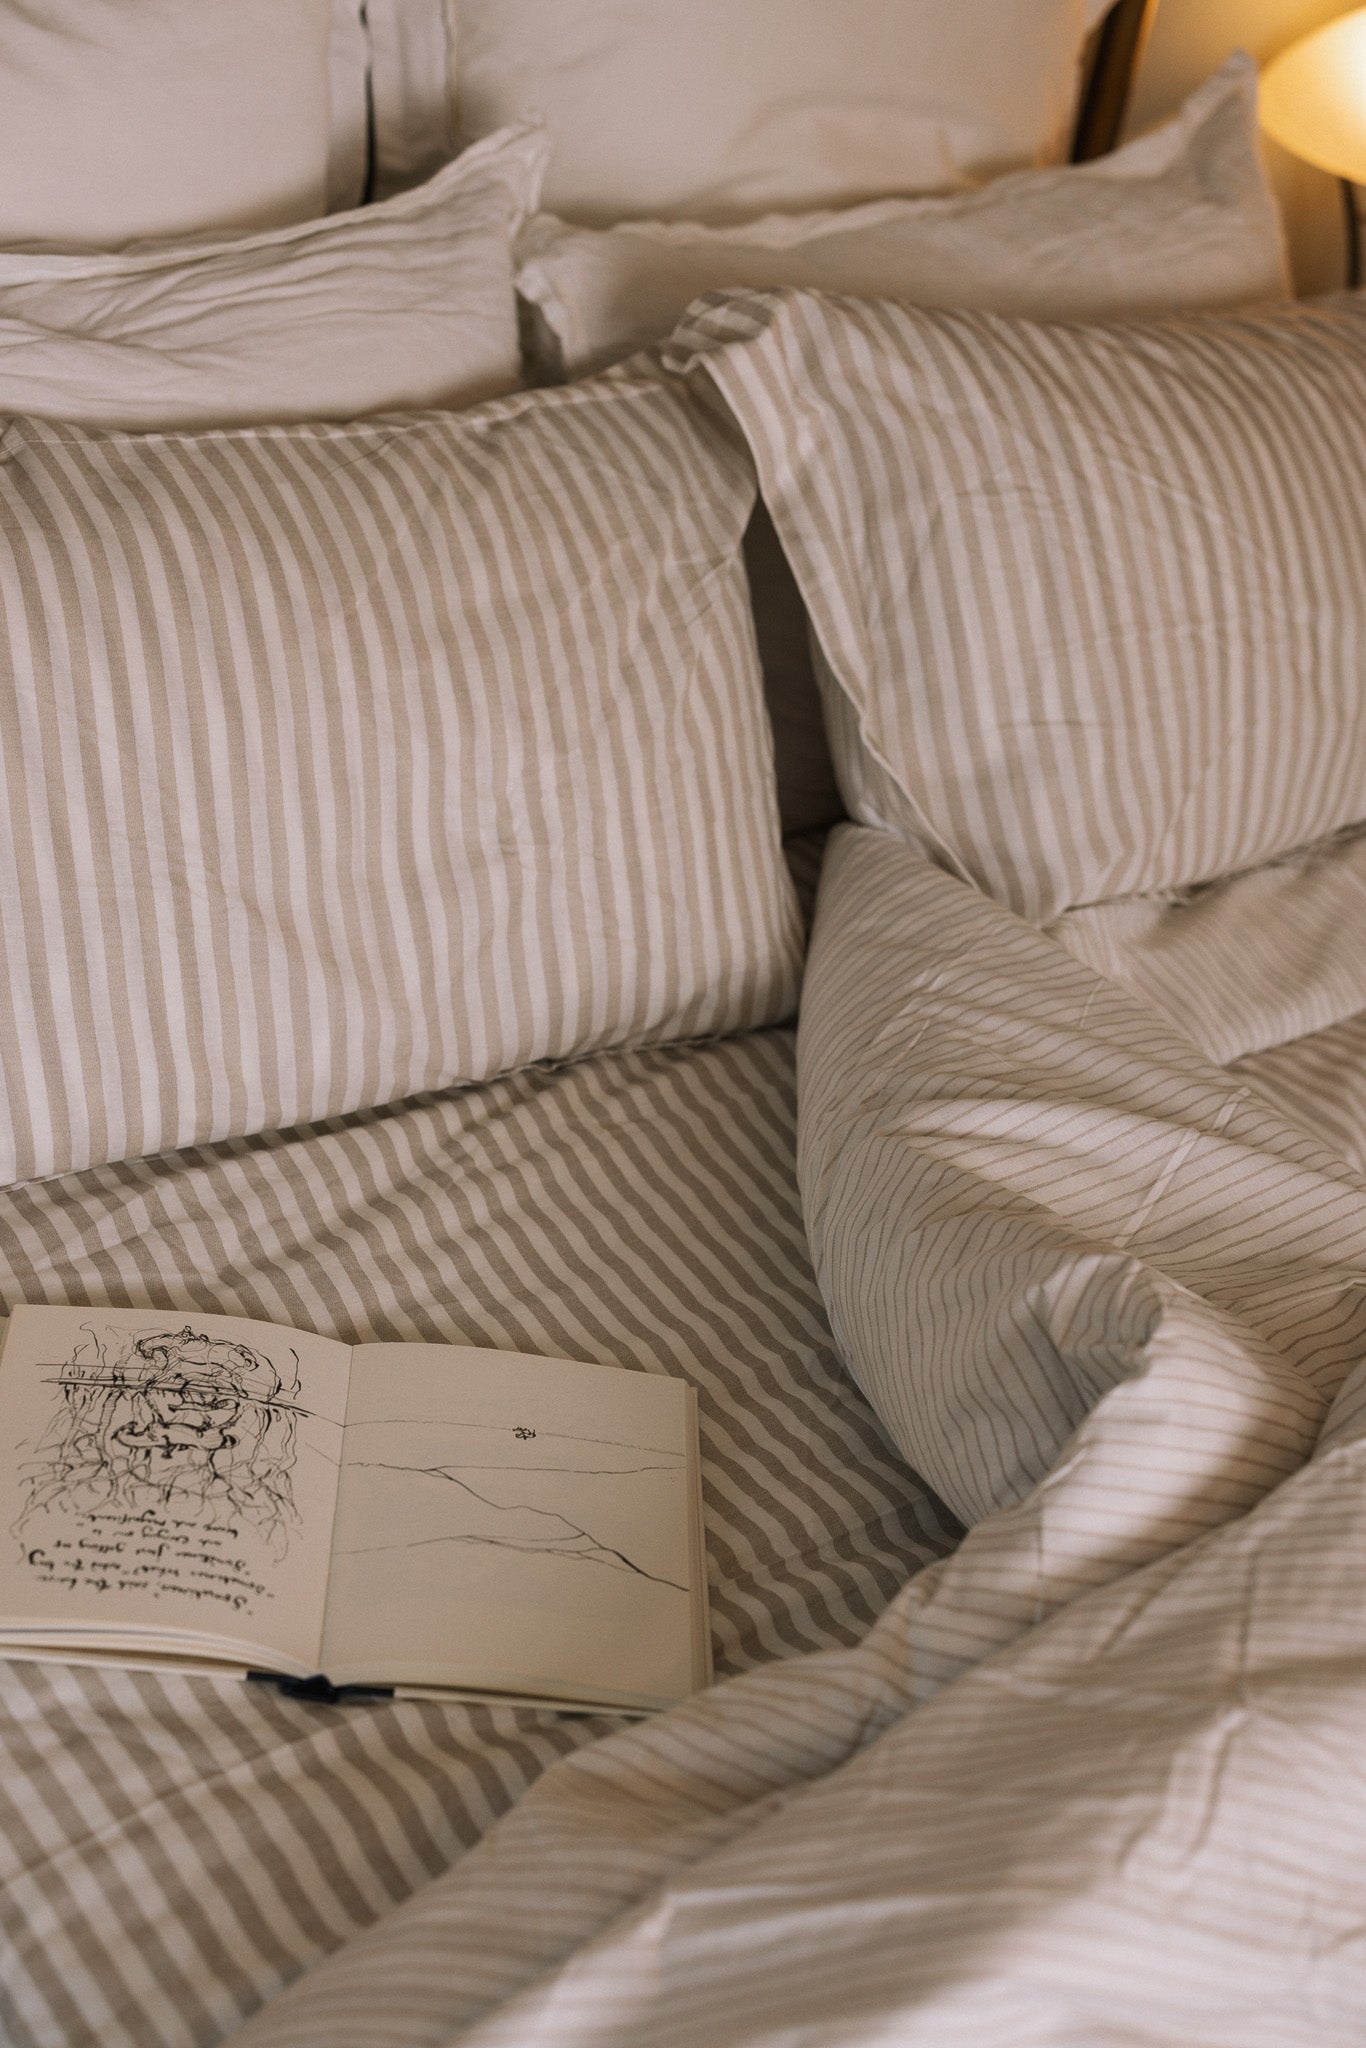 Unmade Striped neutral bedding on a brass bed with an open book.